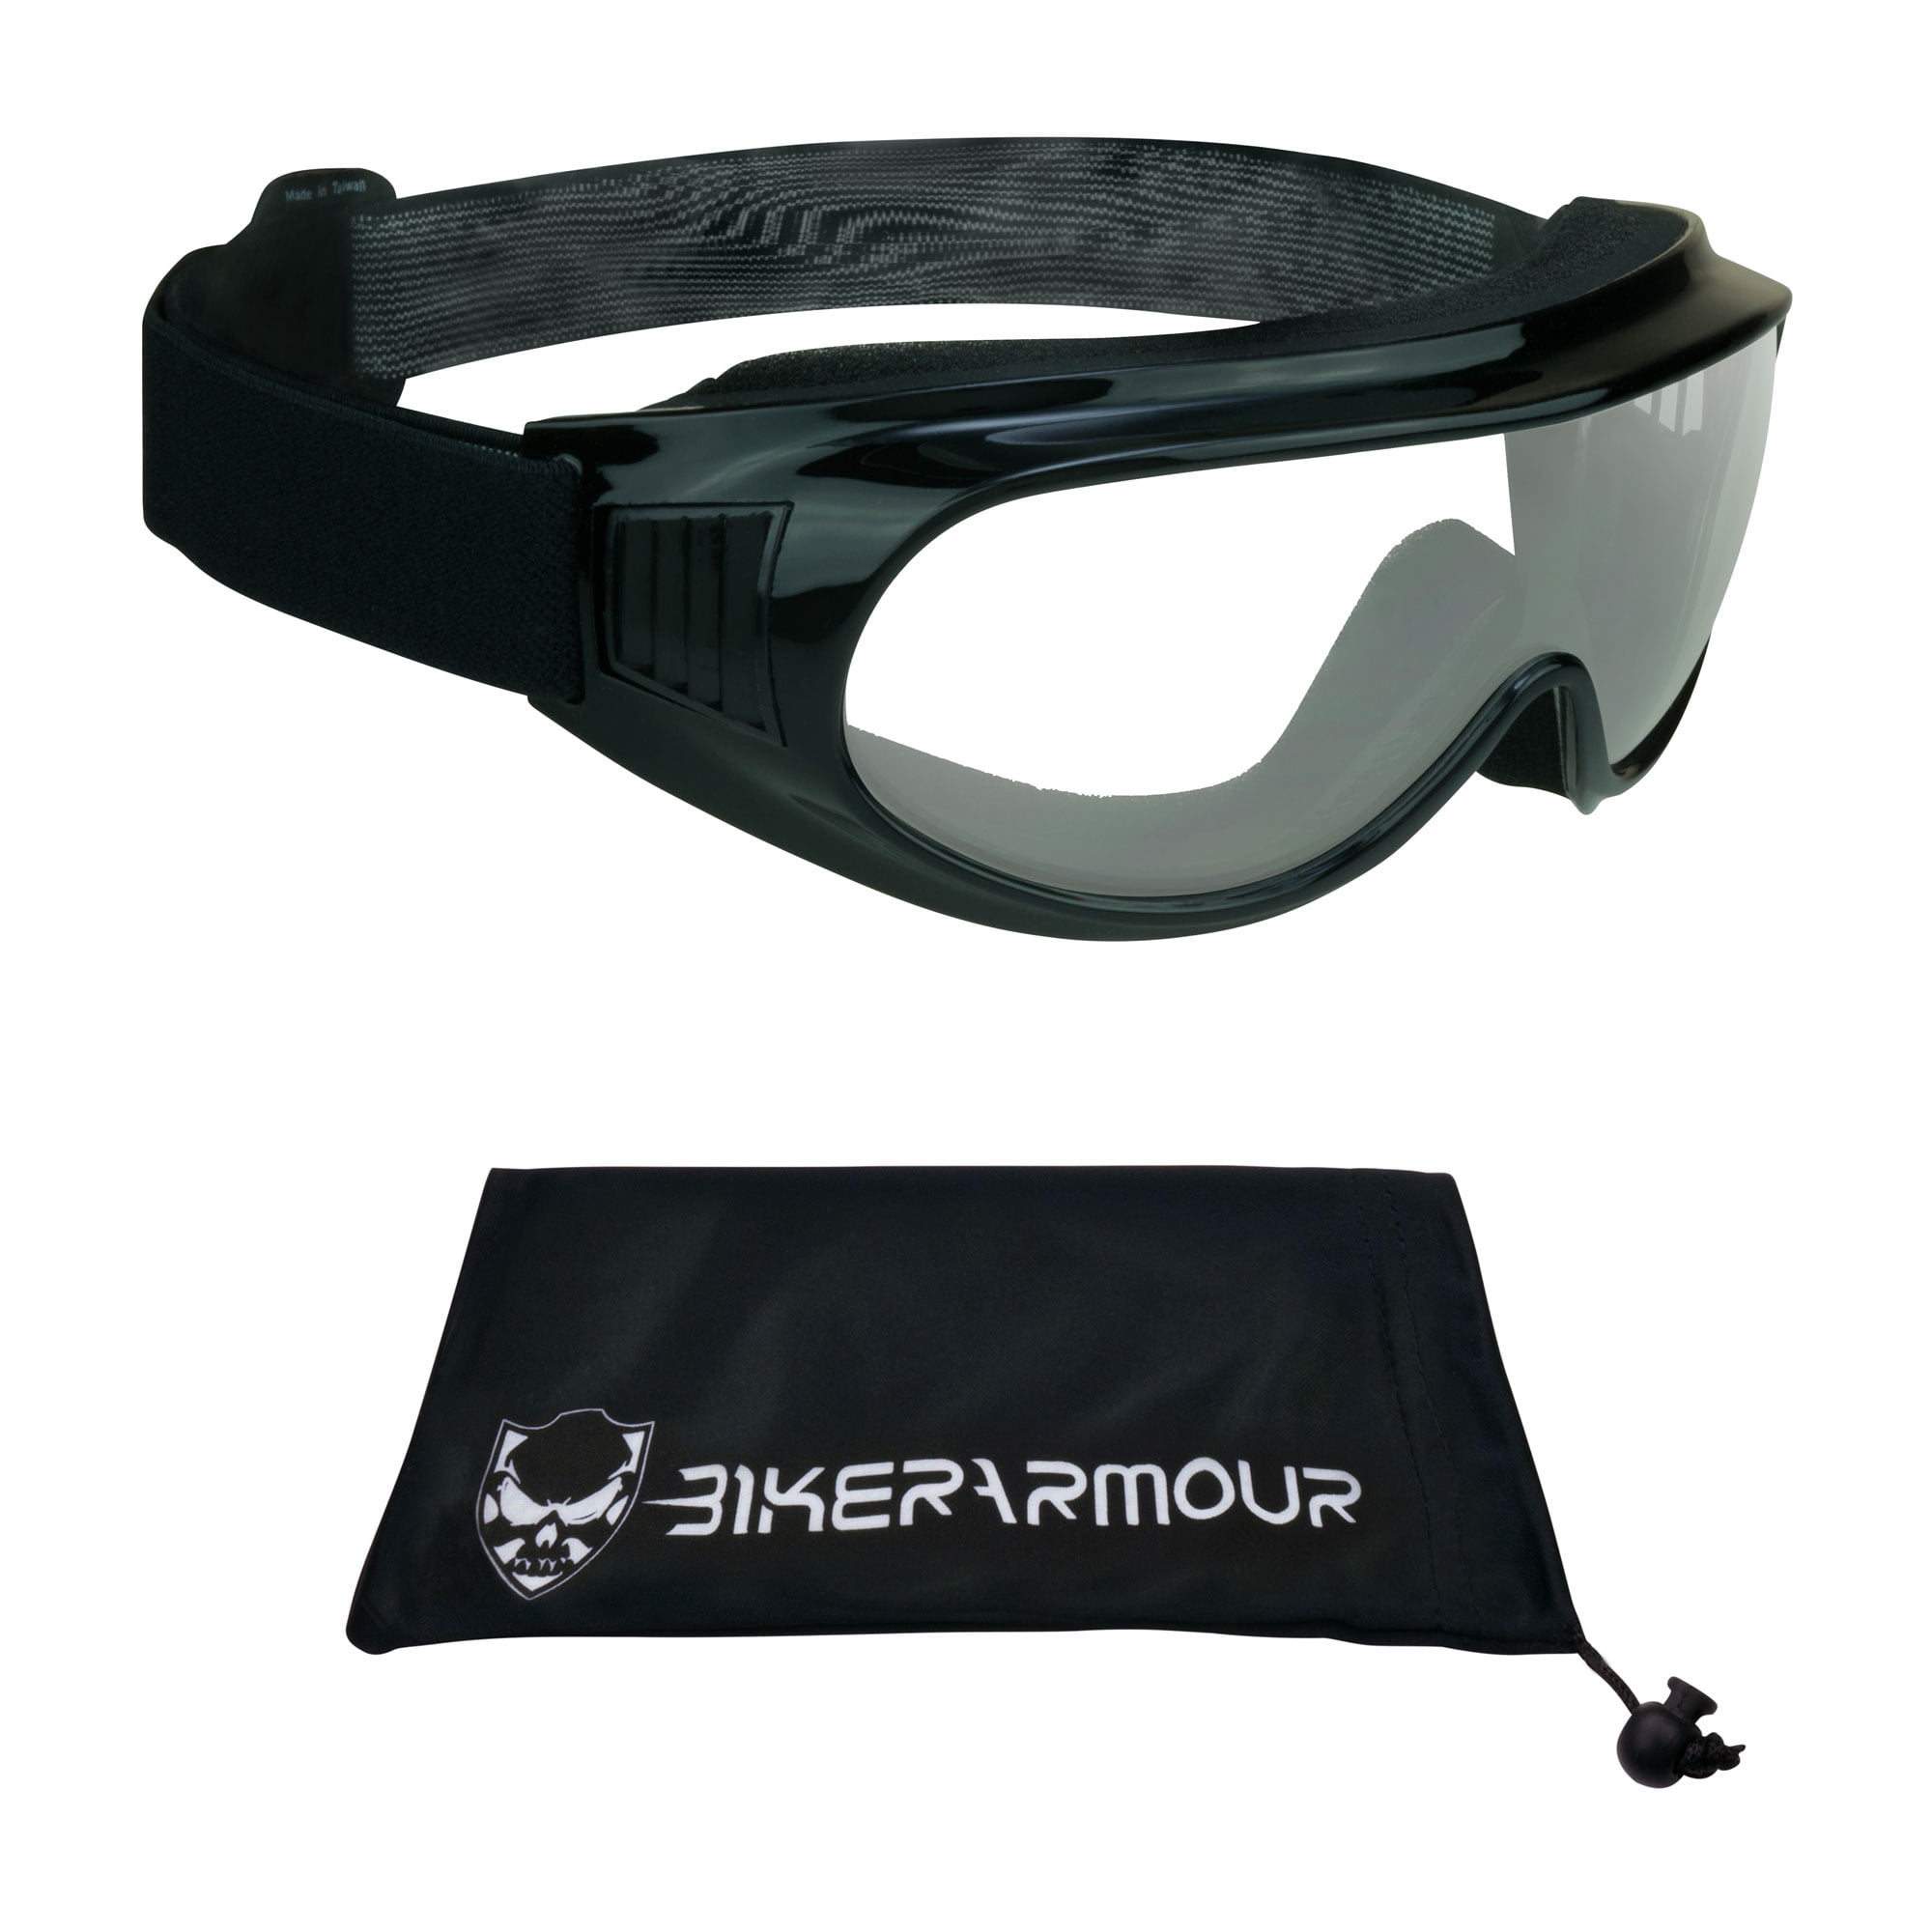 Clear Lens Normal Vision Fit Over Glasses Anti-fog Riding Goggles with Sponge Liner Adjustable Elastic Headband 